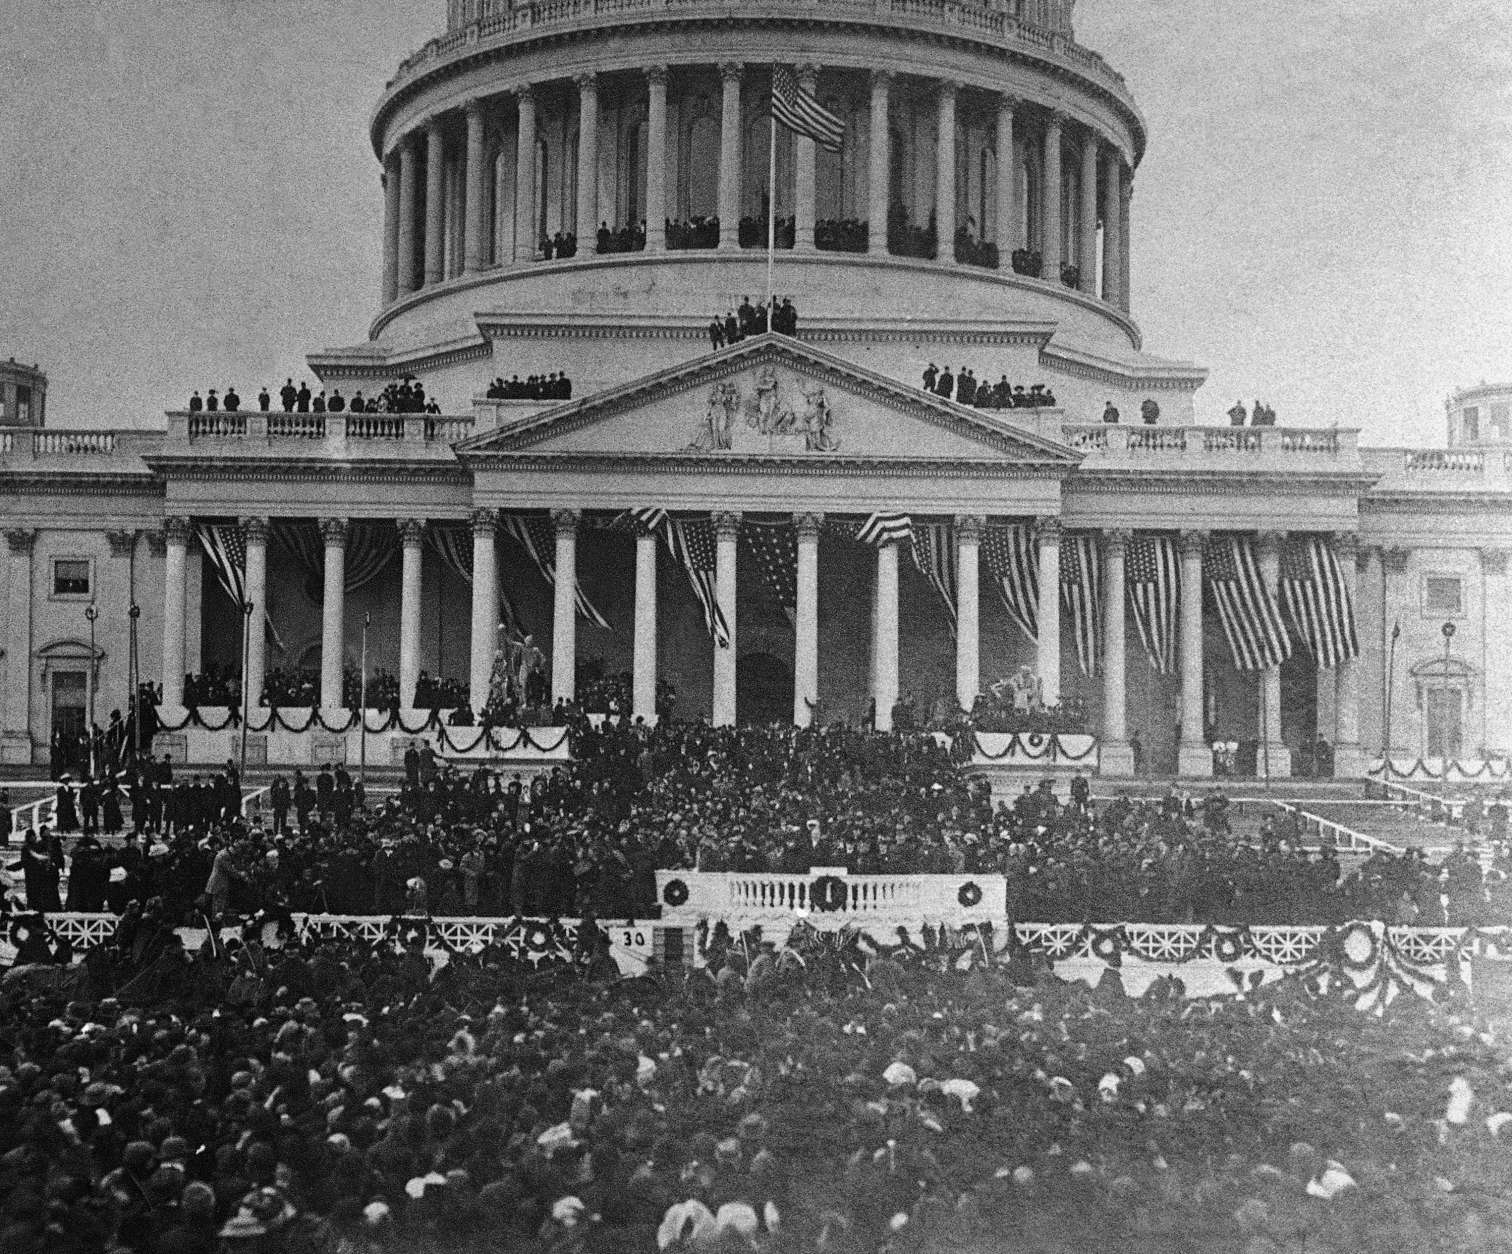 President William Howard Taft  sits in a horse draw carriage beside his wife Helen  in front of the white podium area of photo after Inaugural  ceremonies at the Capitol, in center of photo.  The president and his procession are preparing to leave the Capitol area.   The inauguration took place in the Senate chamber because of a blizzard on March 4, 1909.   For the first time in the country's history, the president's wife  accompanied her husband on the return ride in the procession from the Capitol to the White House following his Inauguration.    (AP Photo/Library of Congress)